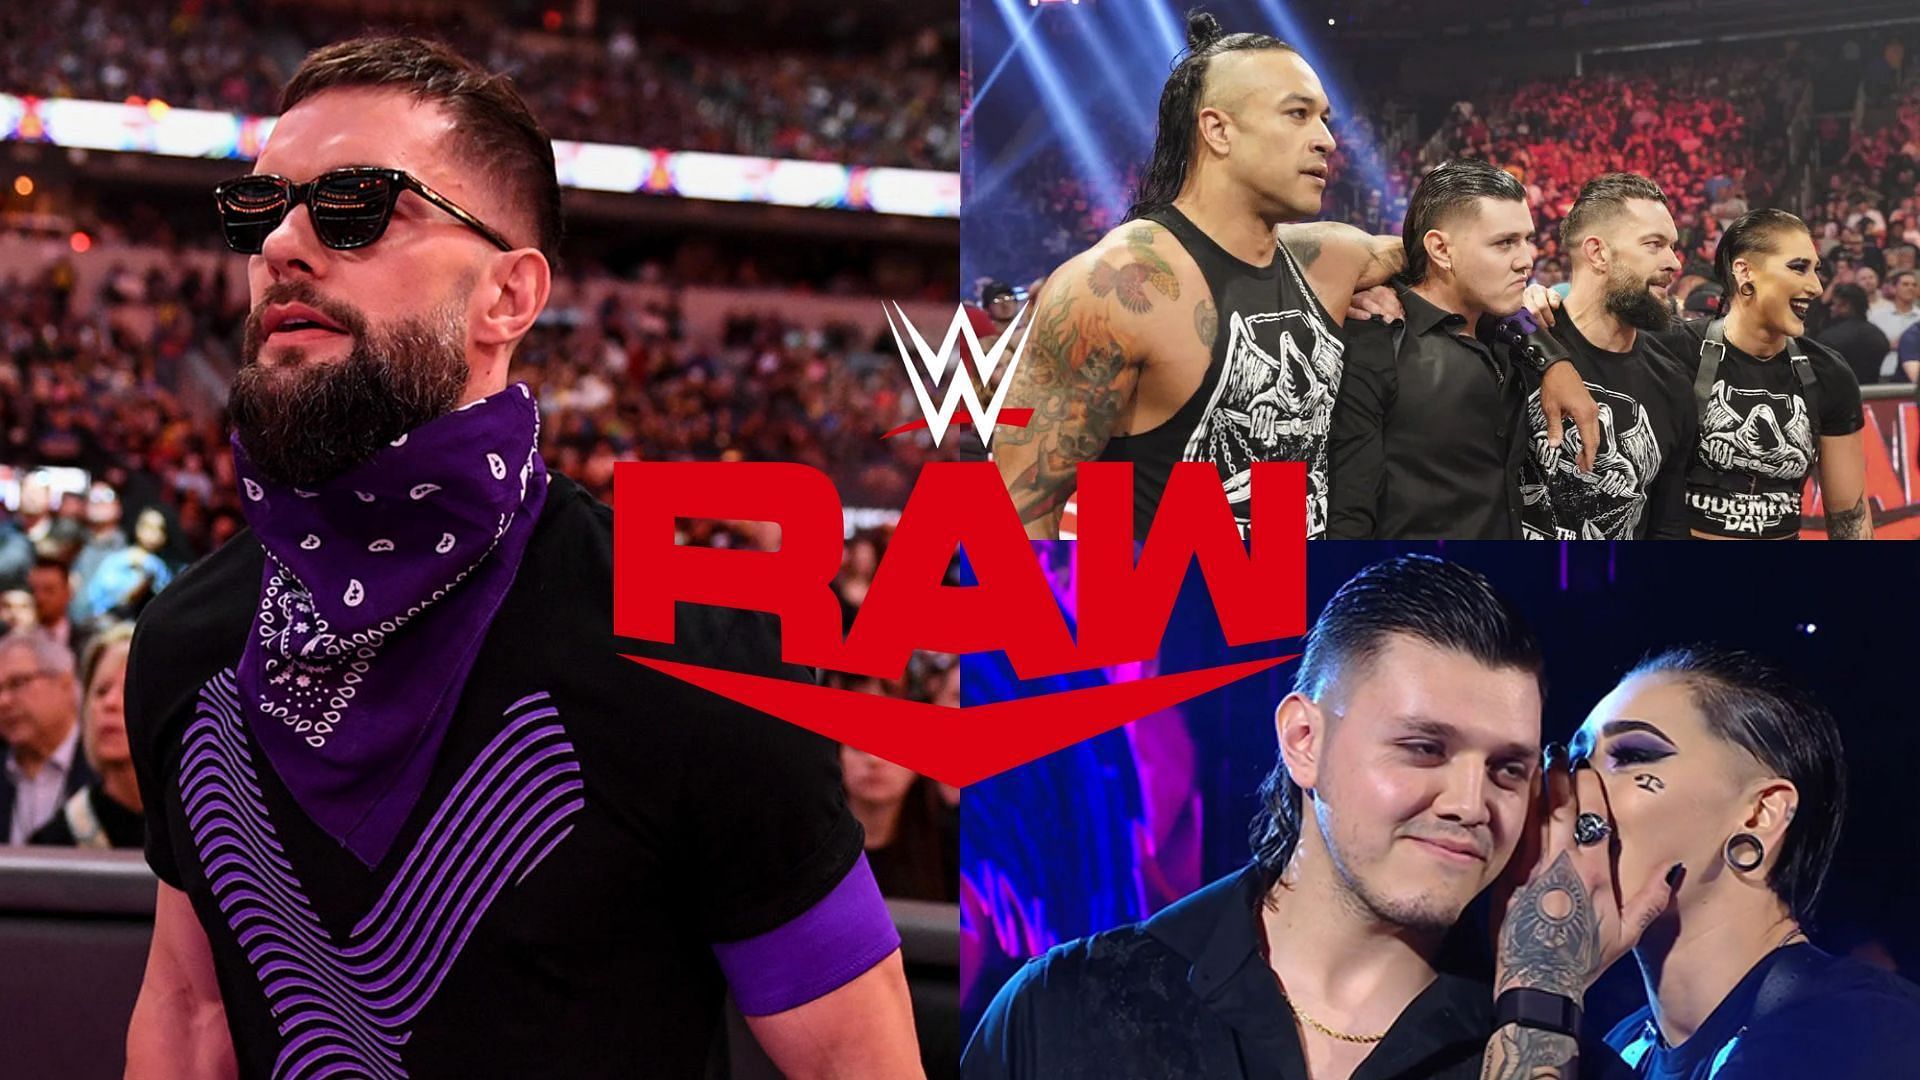 The Judgment Day rules Monday nights on RAW